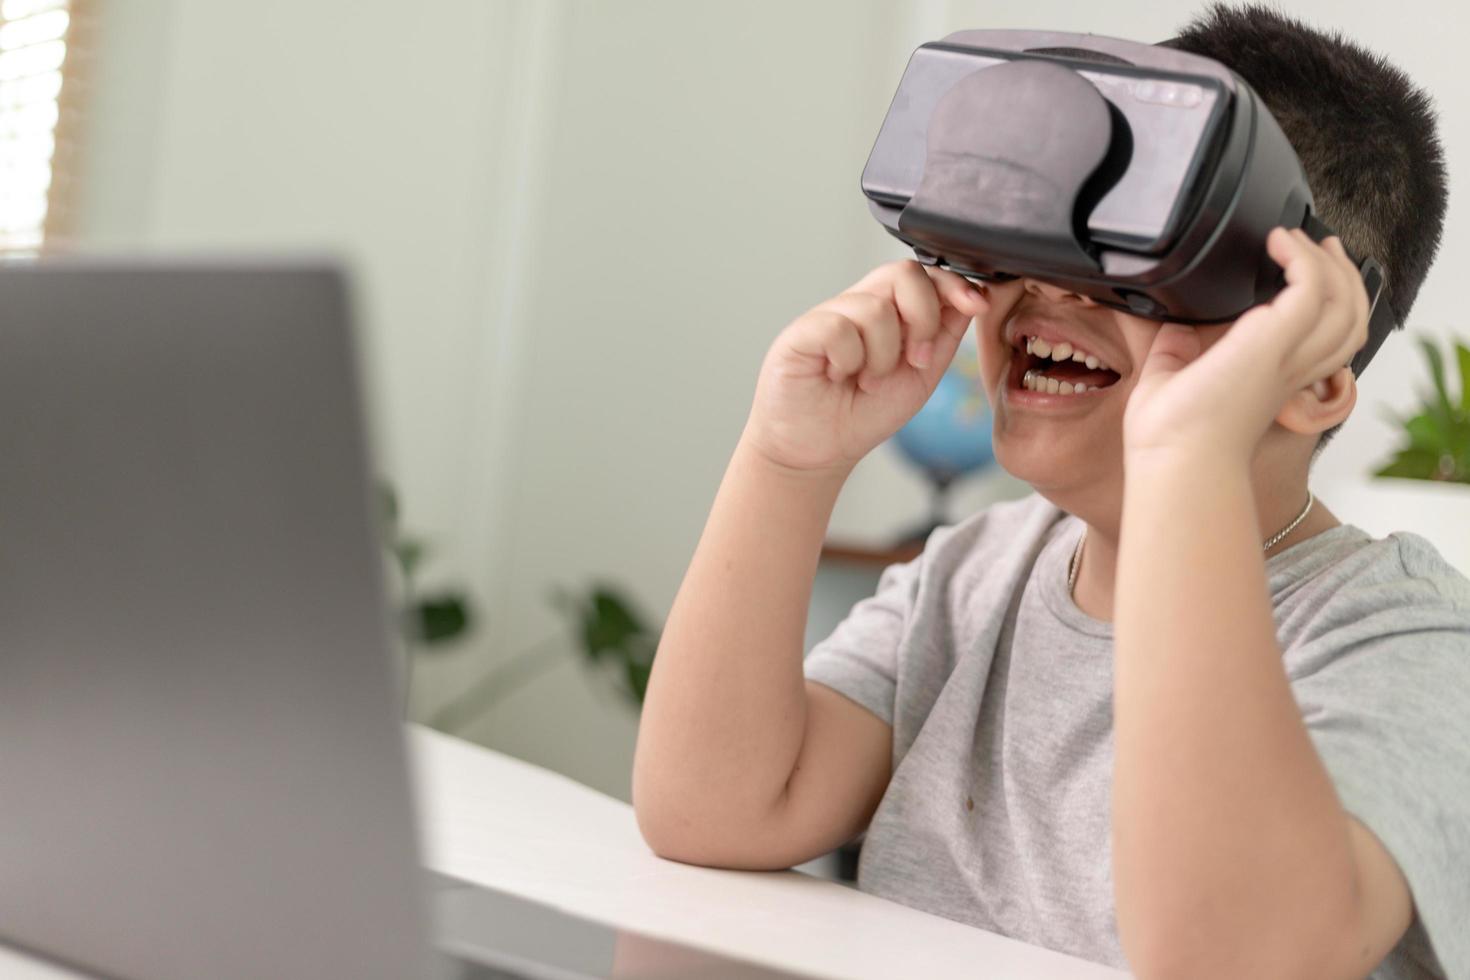 Asian Little boy with VR glasses studying sciences at home,curious student wears a virtual reality headset to study science home online study futuristic lifestyle learning photo